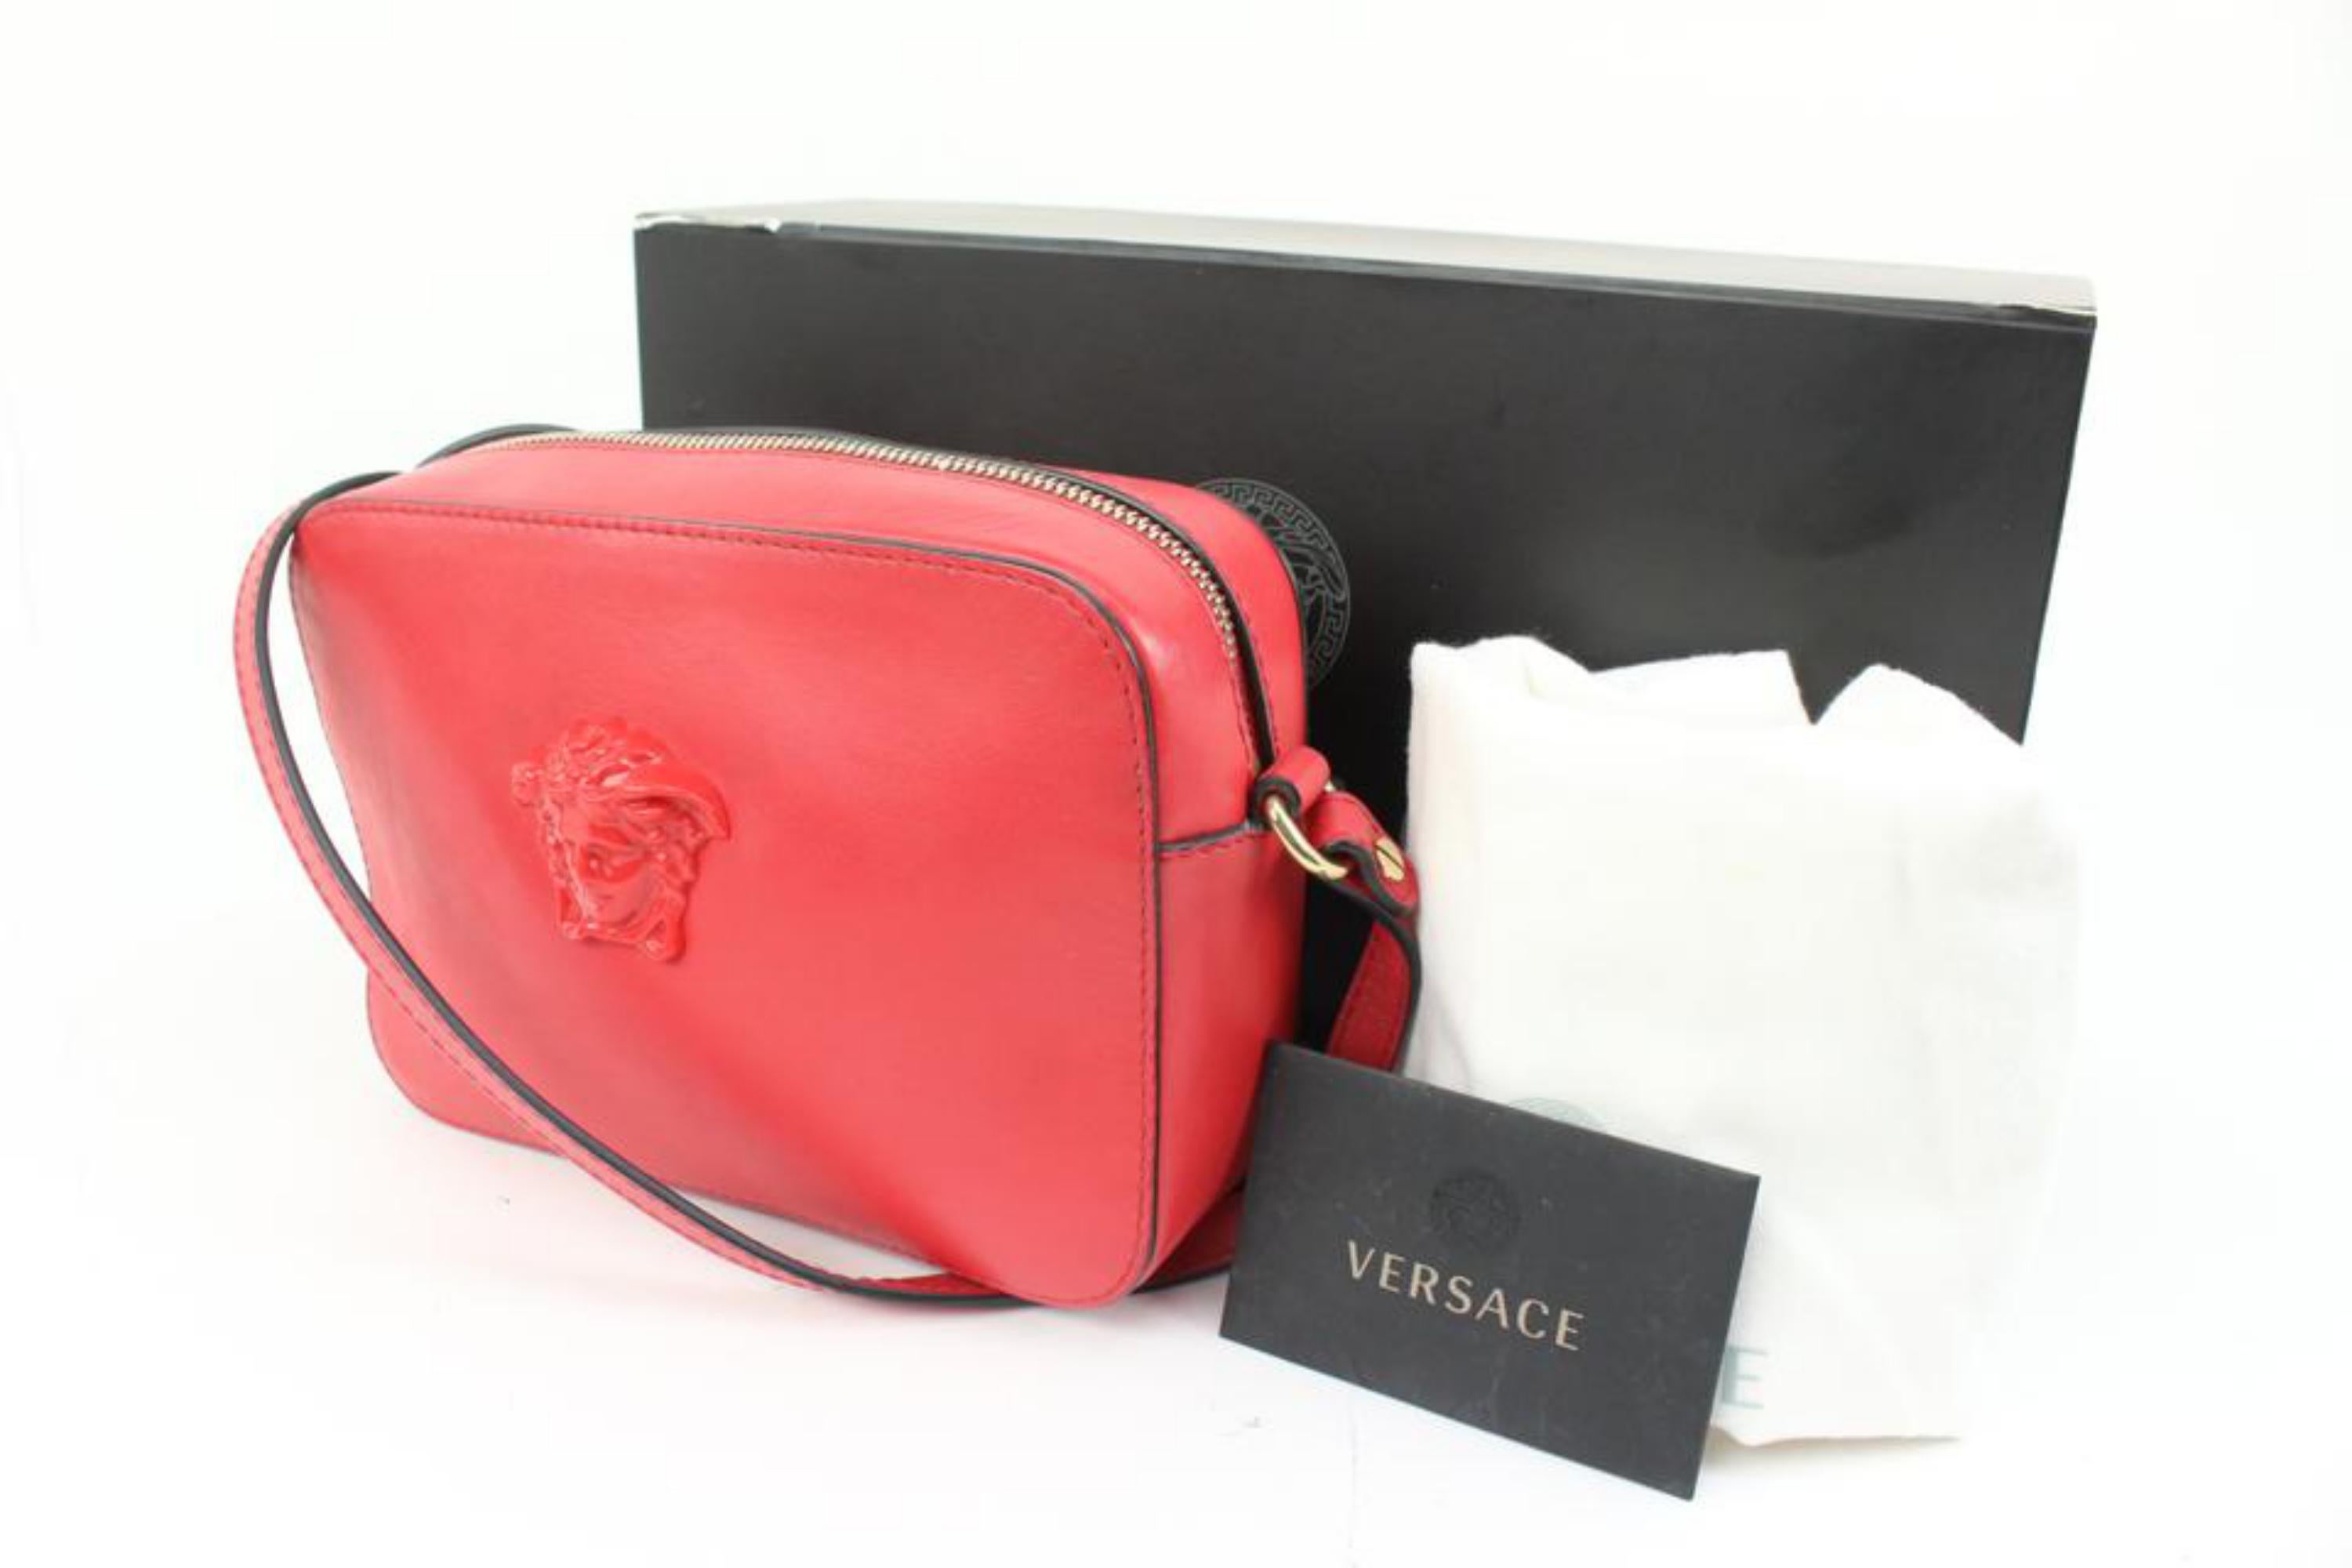 Versace Red Leather Medusa Camera Crossbody Bag 35v413s
Made In: Italy
Measurements: Length:  8